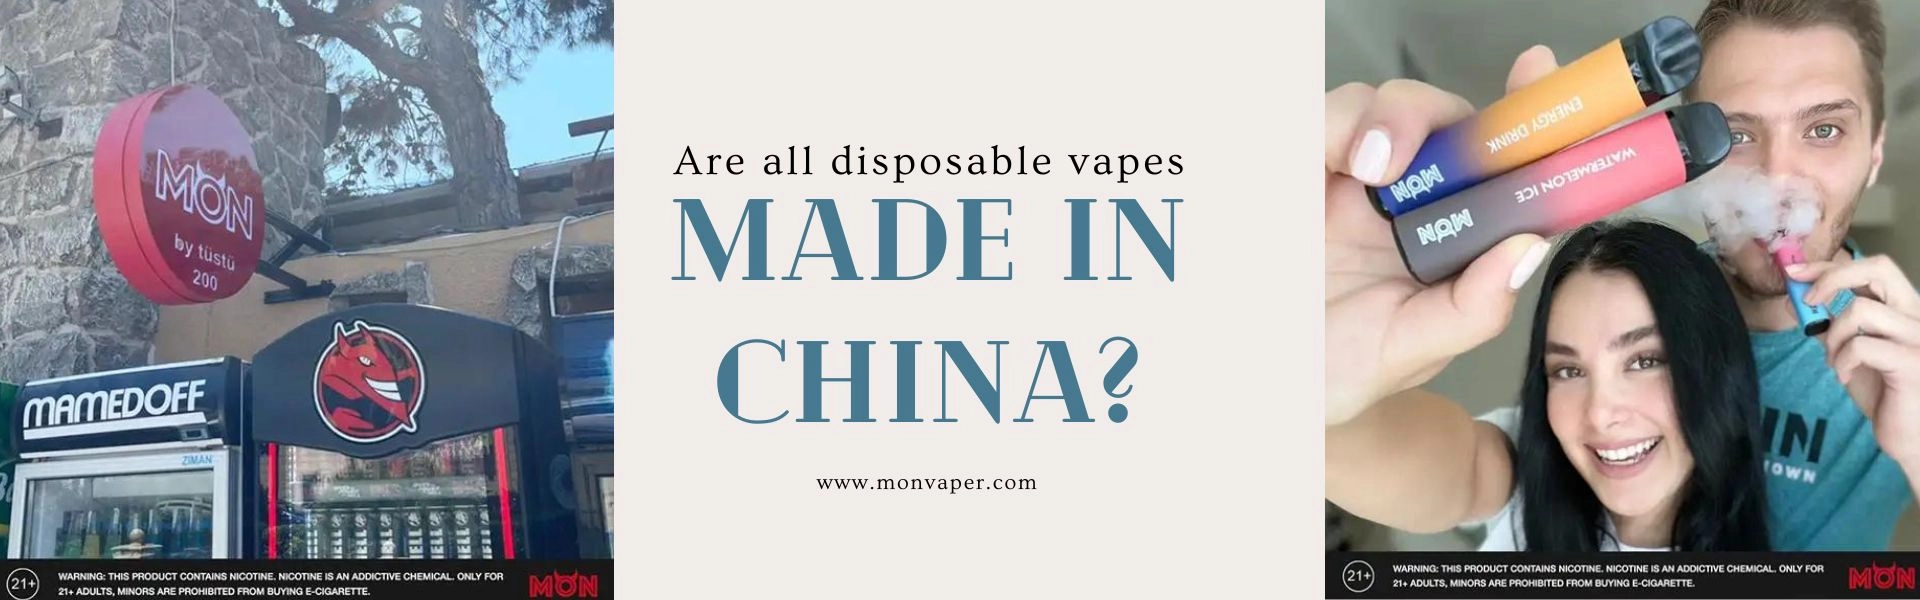 disposable vapes made in China